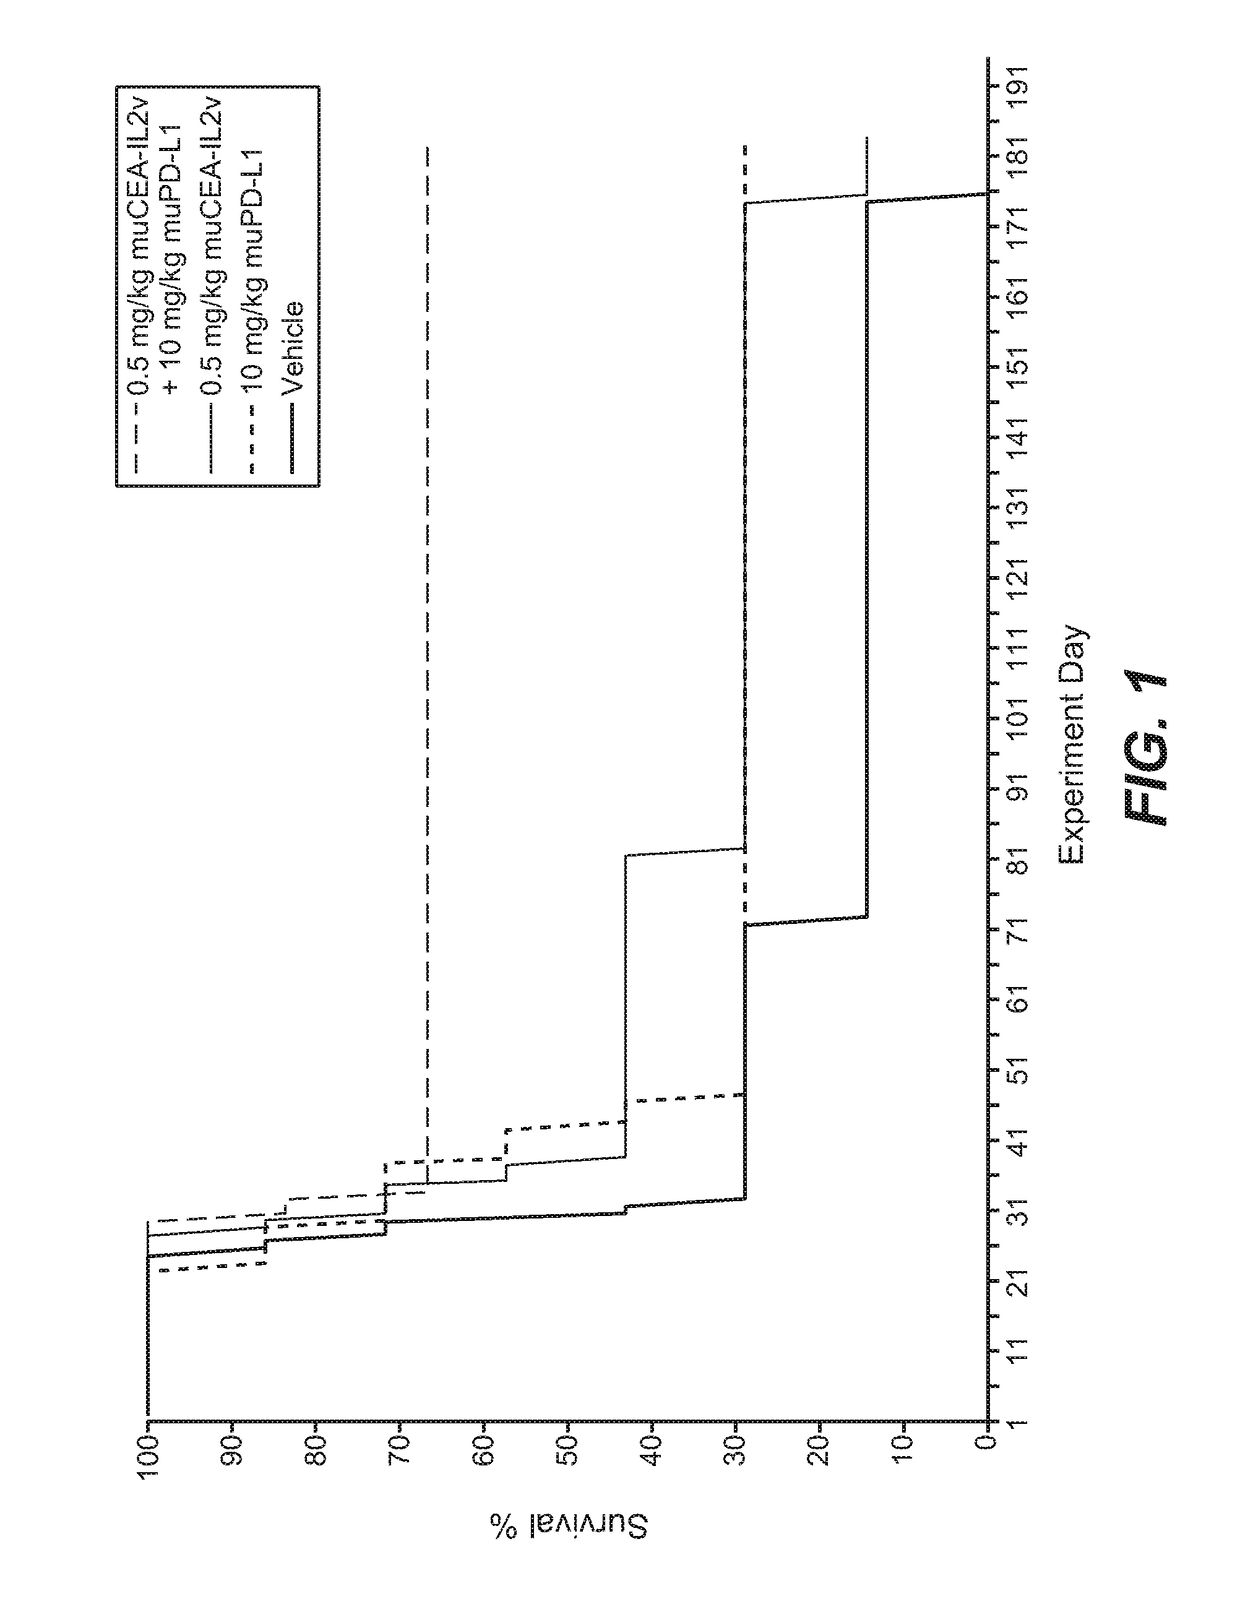 Combination therapy of tumor-targeted il-2 variant immunocytokines and antibodies against human pd-l1